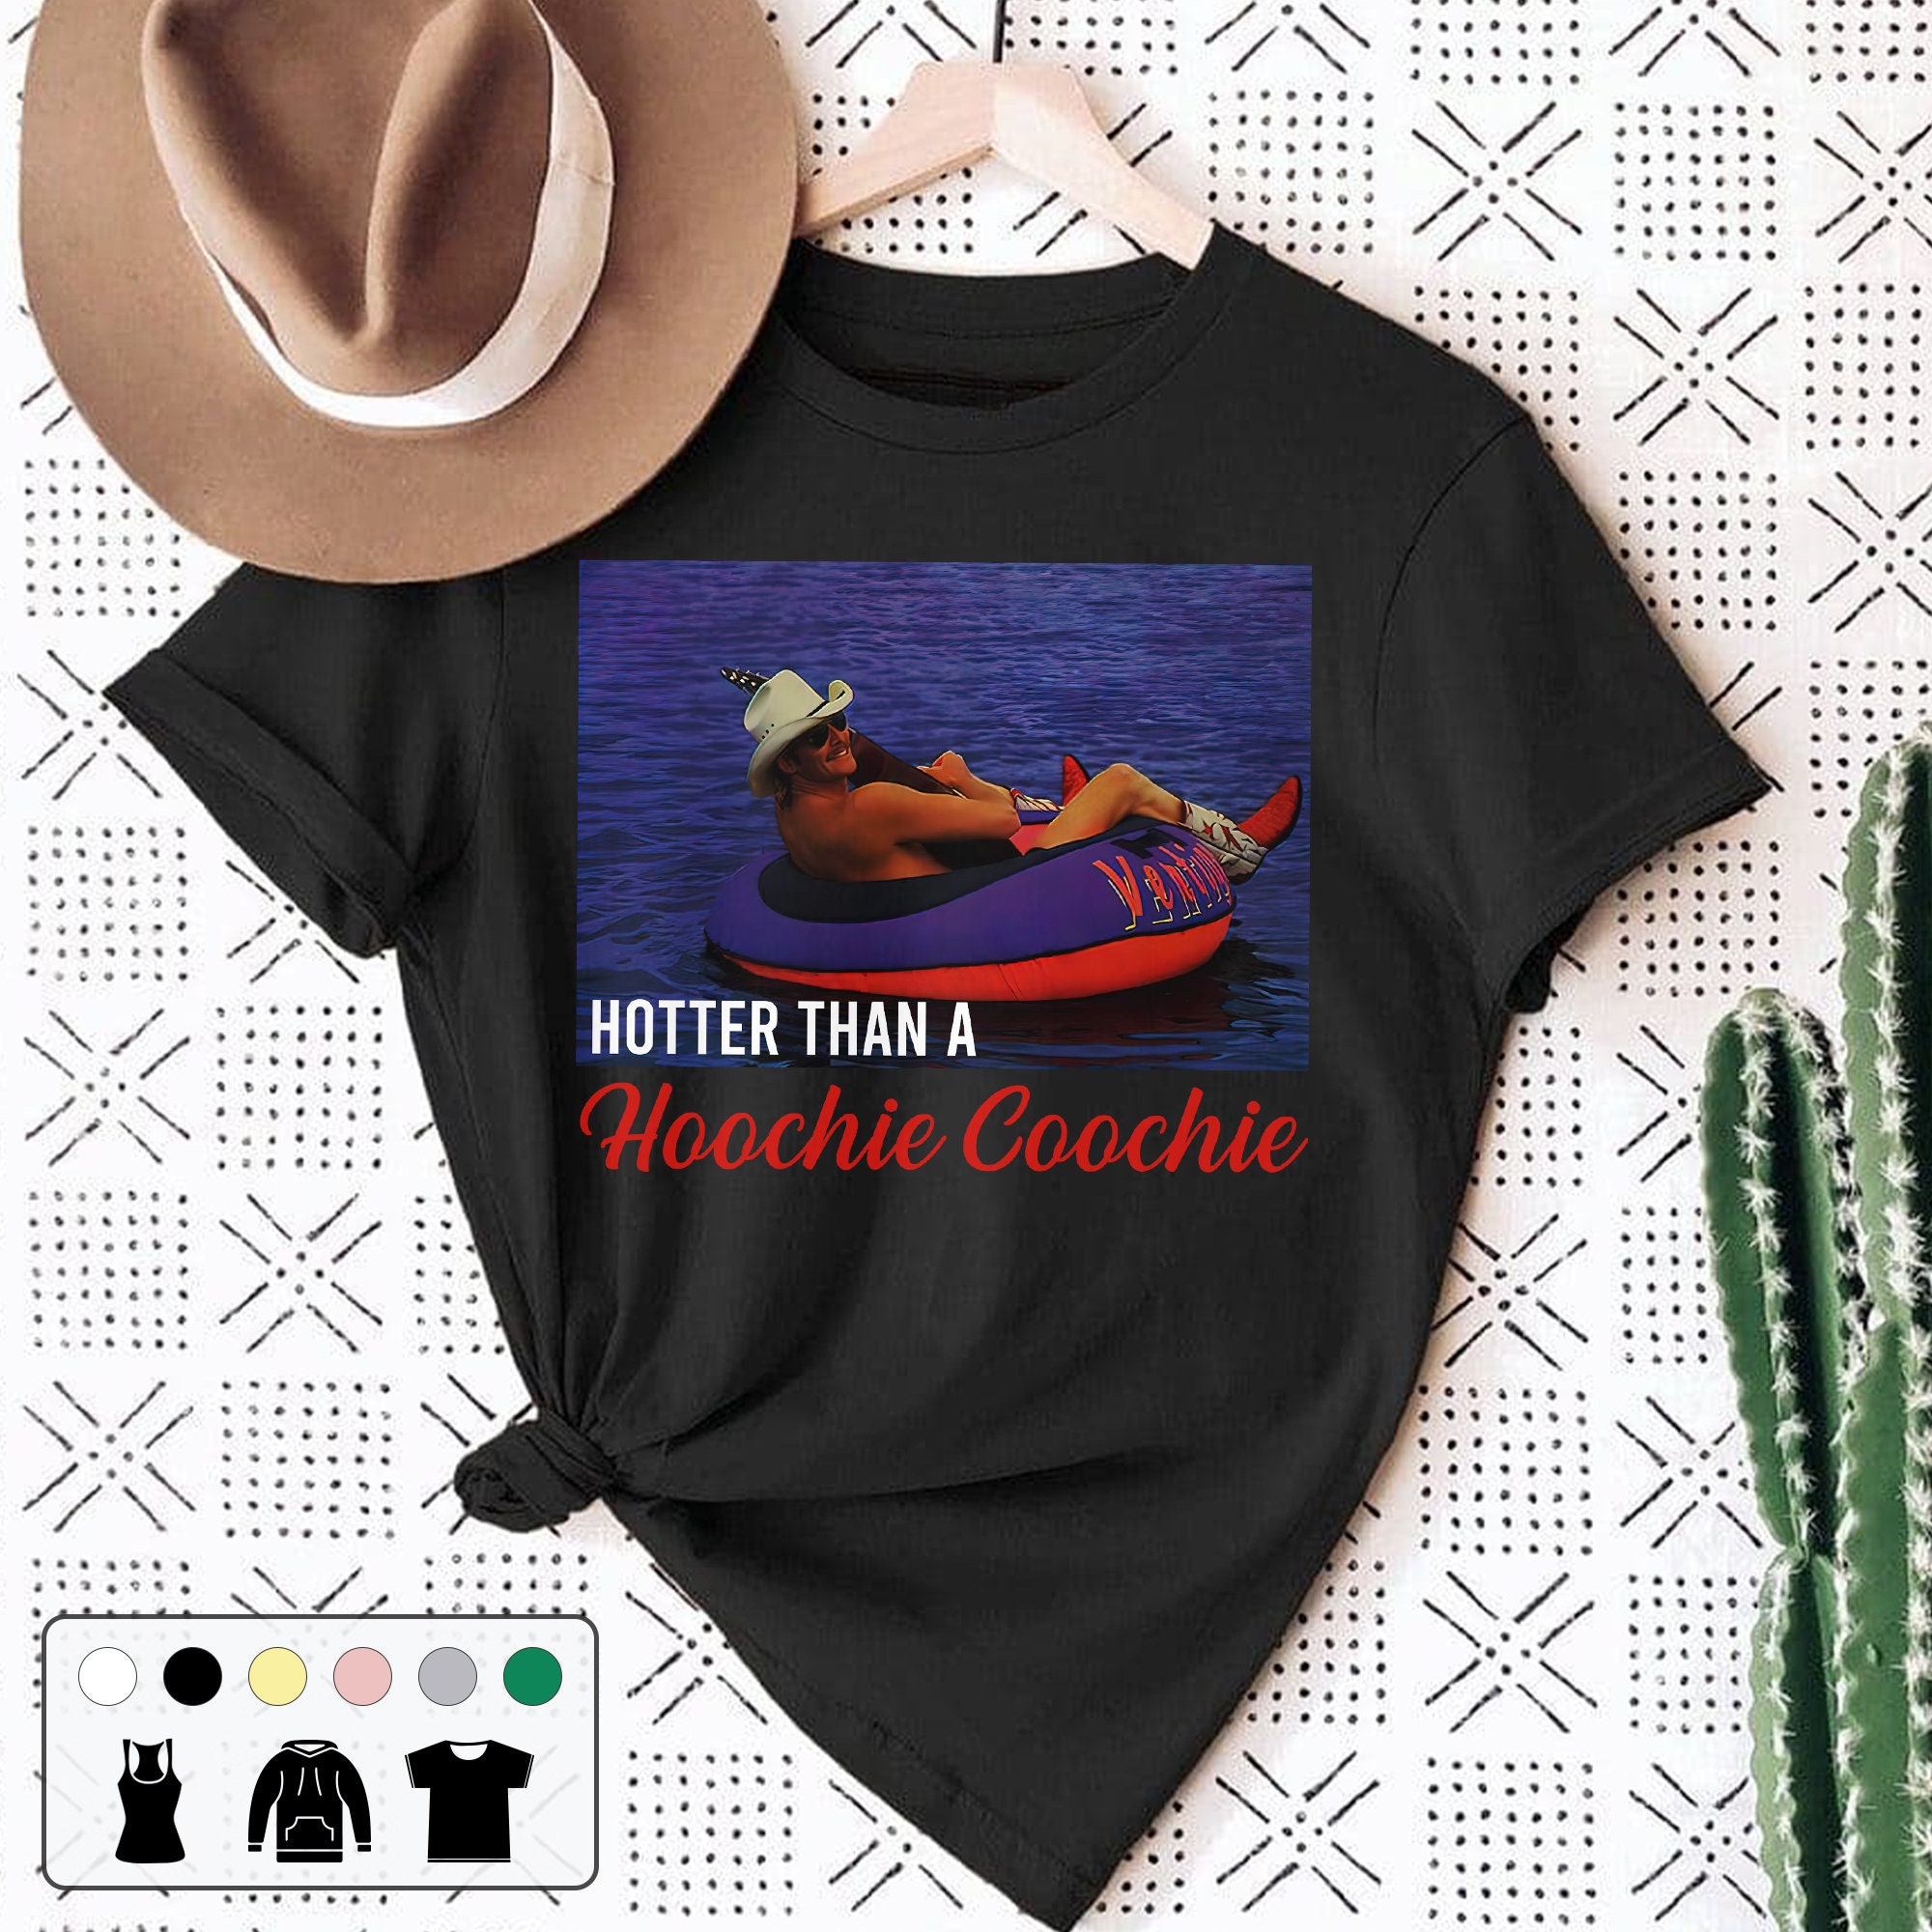 Discover Hotter Than A Hoochie Coochie Vintage T Shirt,